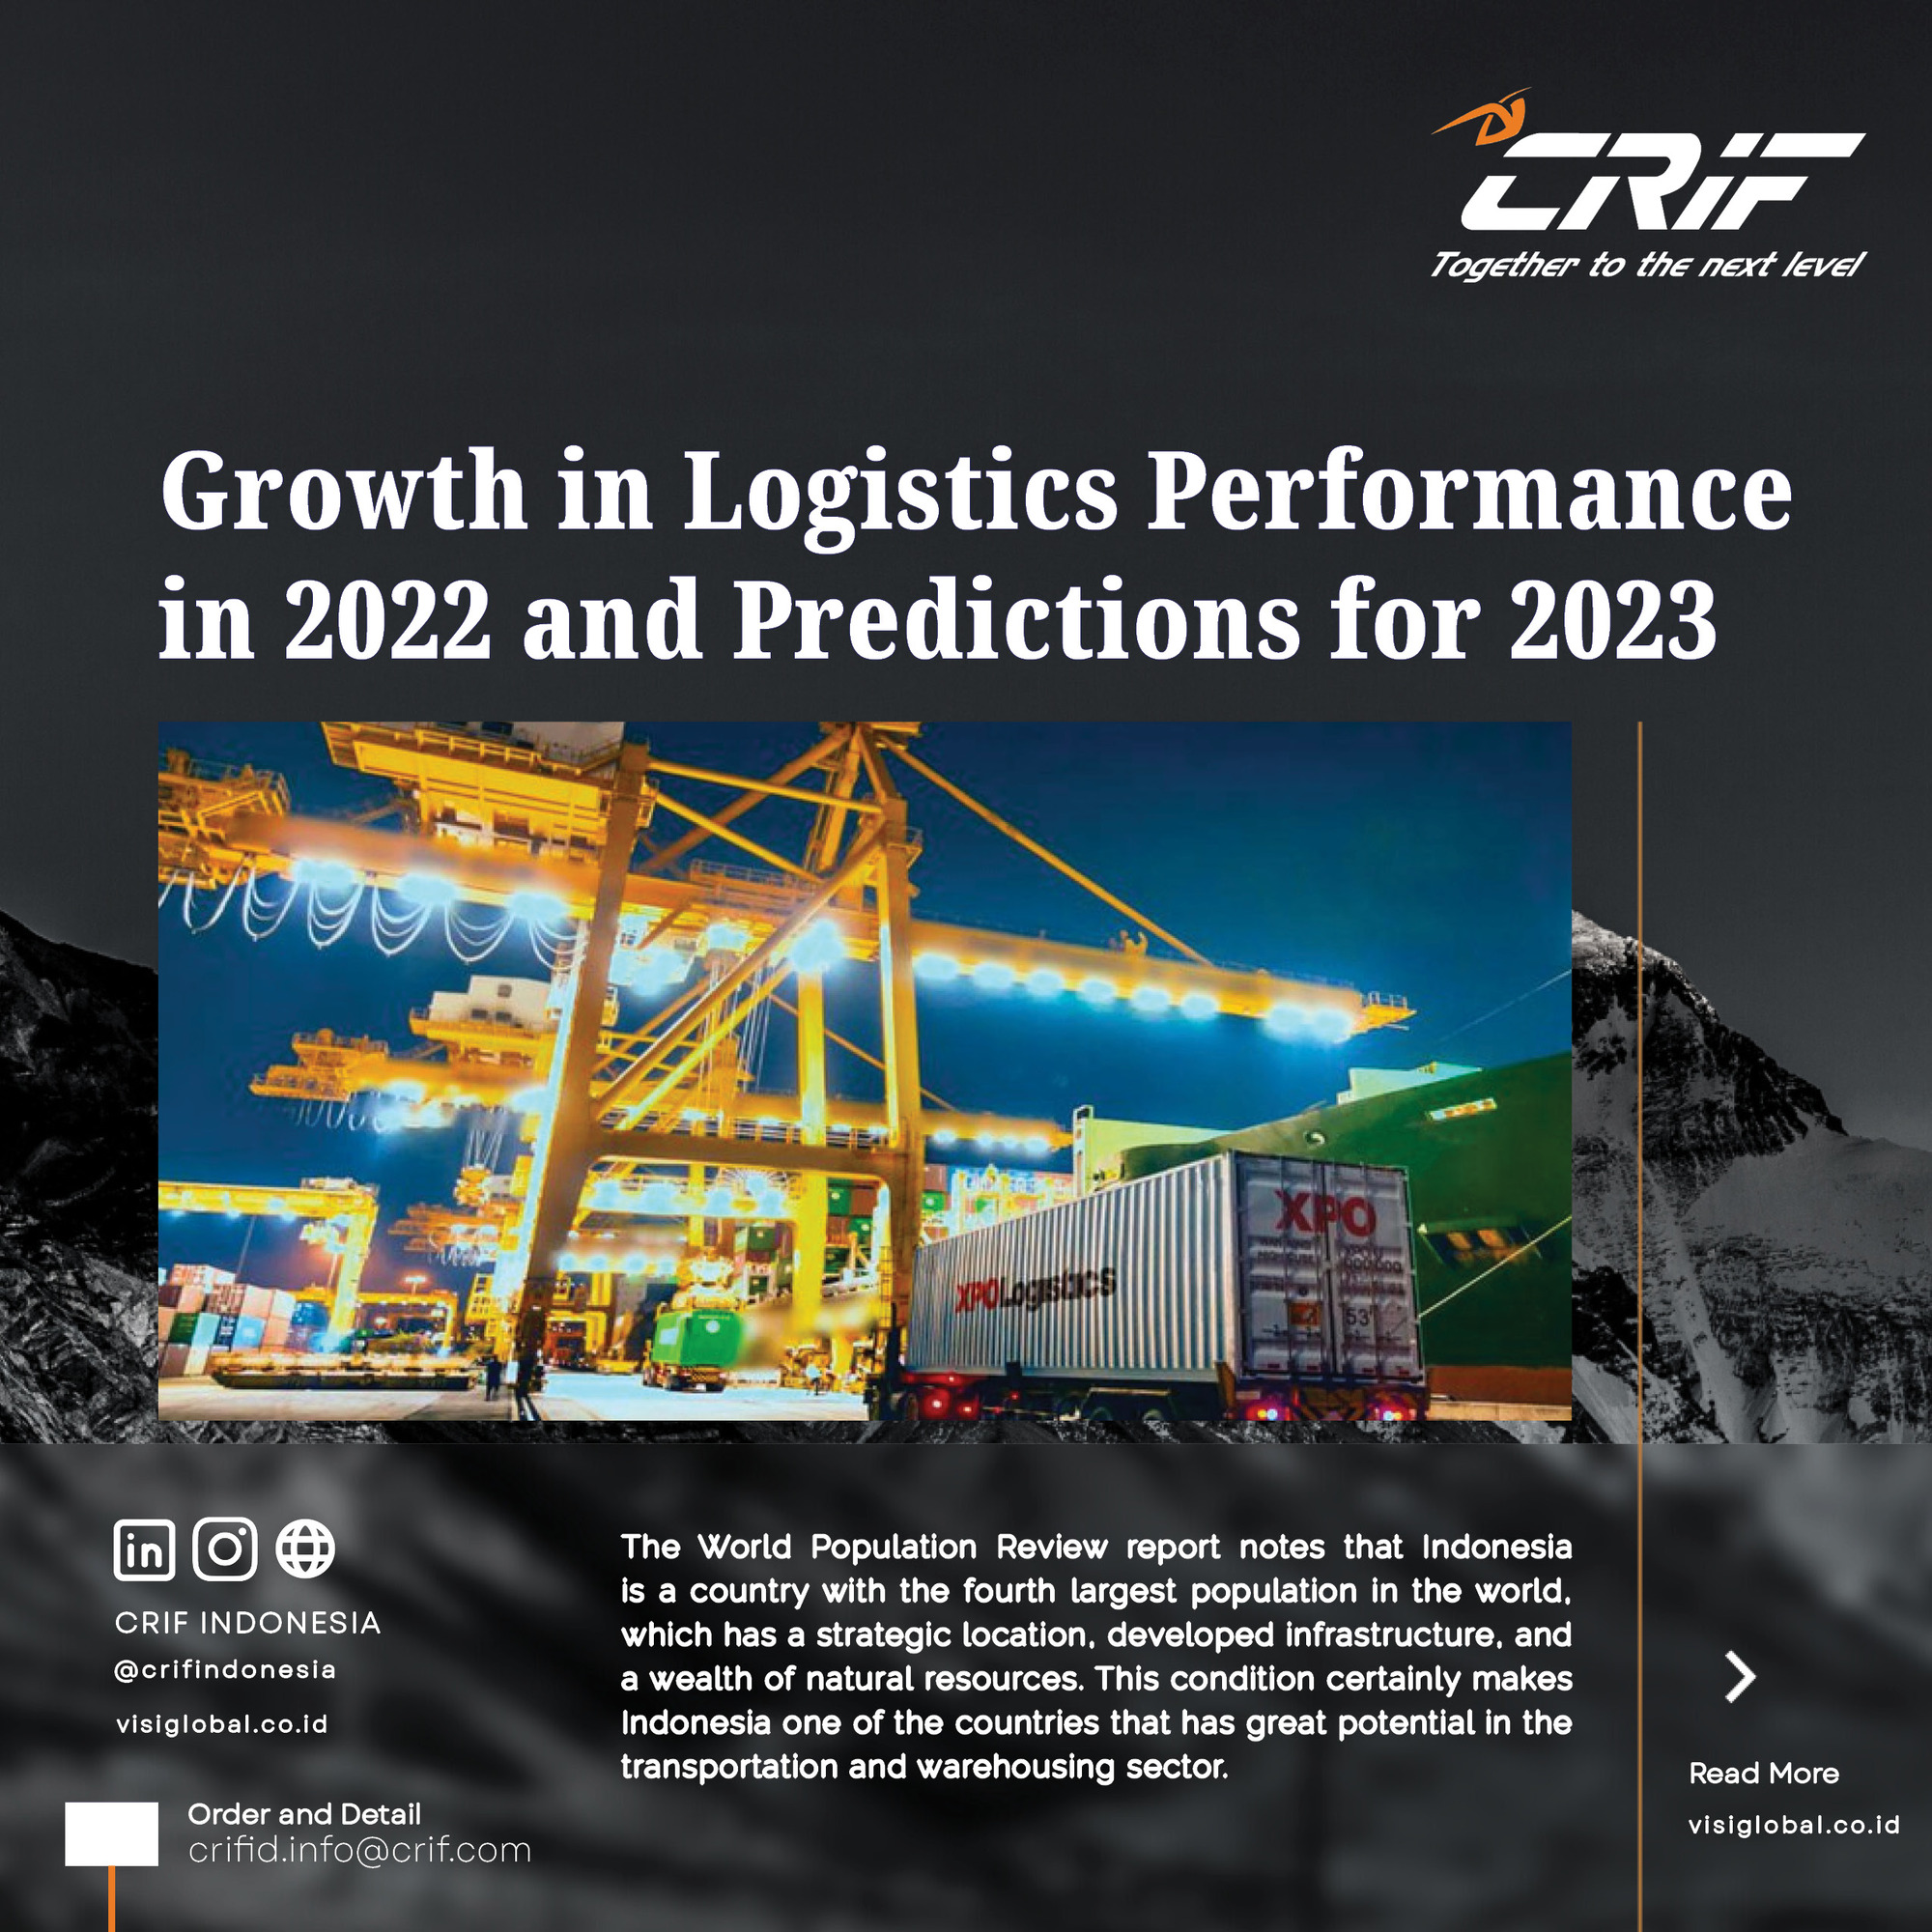 Growth in Logistics Performance in 2022 and Predictions for 2023